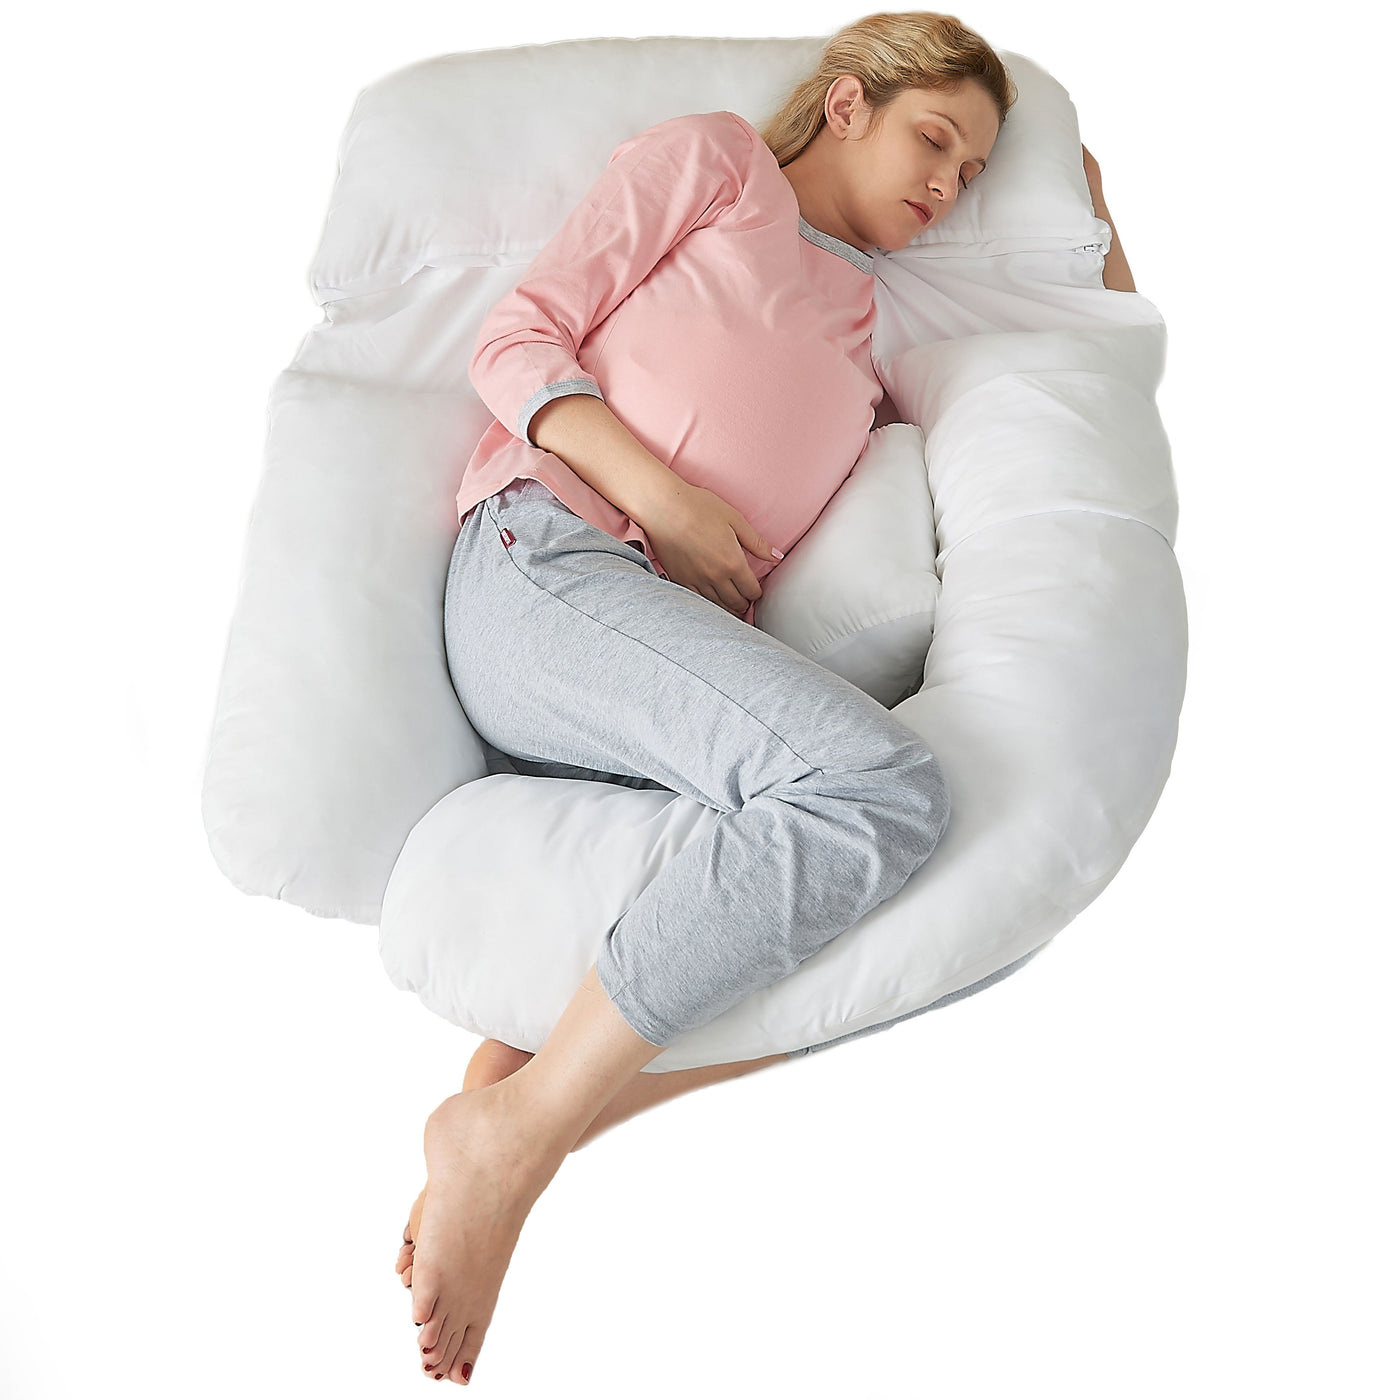 https://www.cheercollection.com/cdn/shop/products/cheer-collection-u-shaped-pregnancy-support-body-pillow-with-adjustable-positions-752082_1400x.jpg?v=1683869640